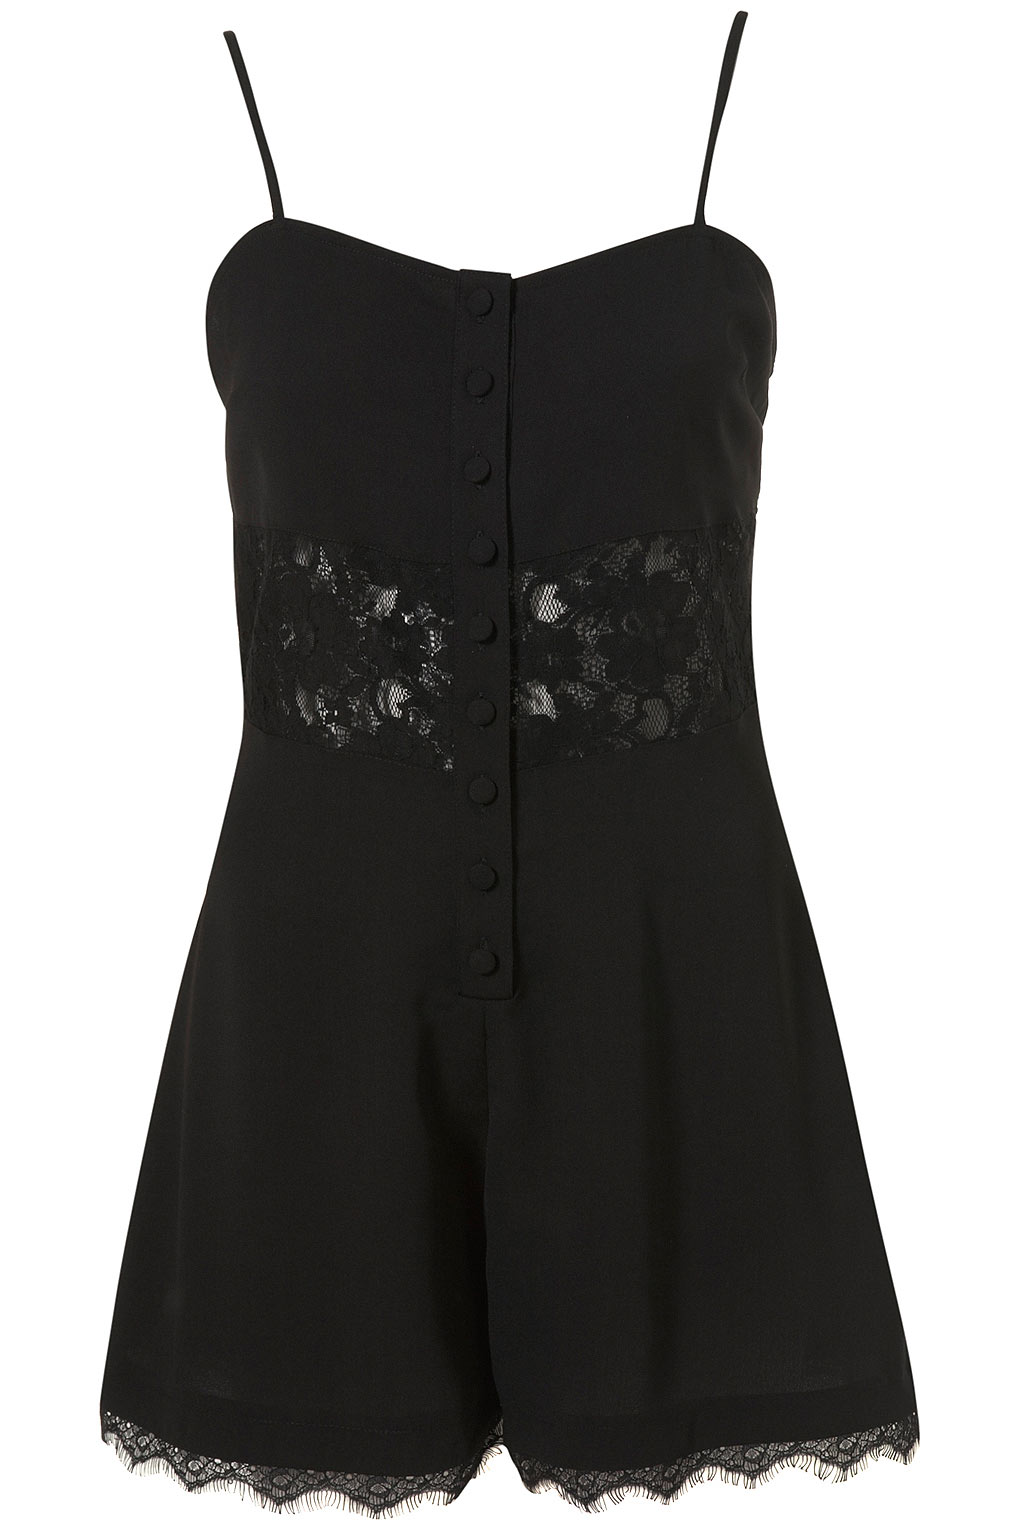 Lyst - Topshop Lace Insert Playsuit in Black